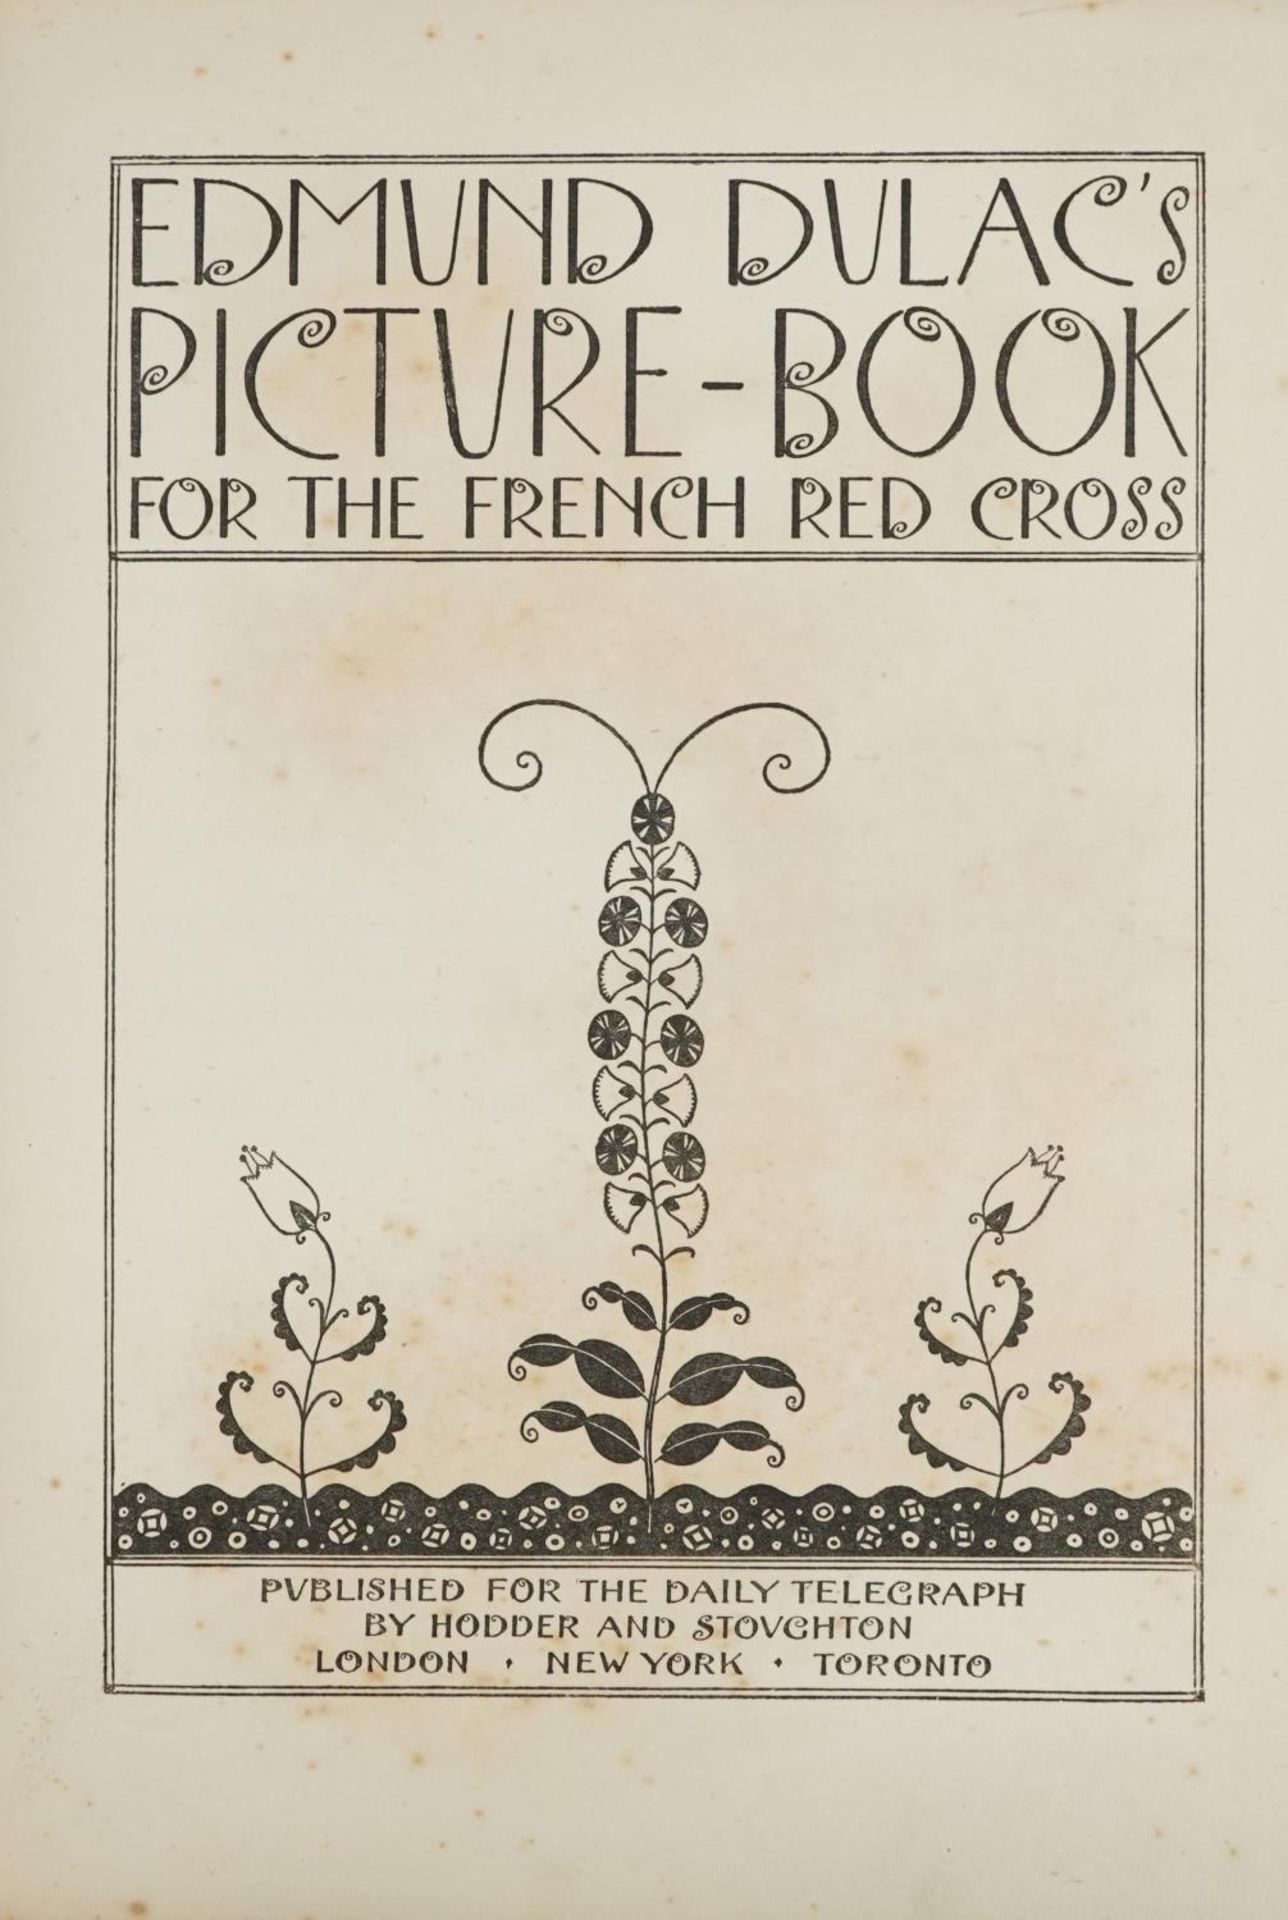 Edmund Dulac's Picture Book for the French Red Cross hardback book published for The Daily Telegraph - Image 2 of 4